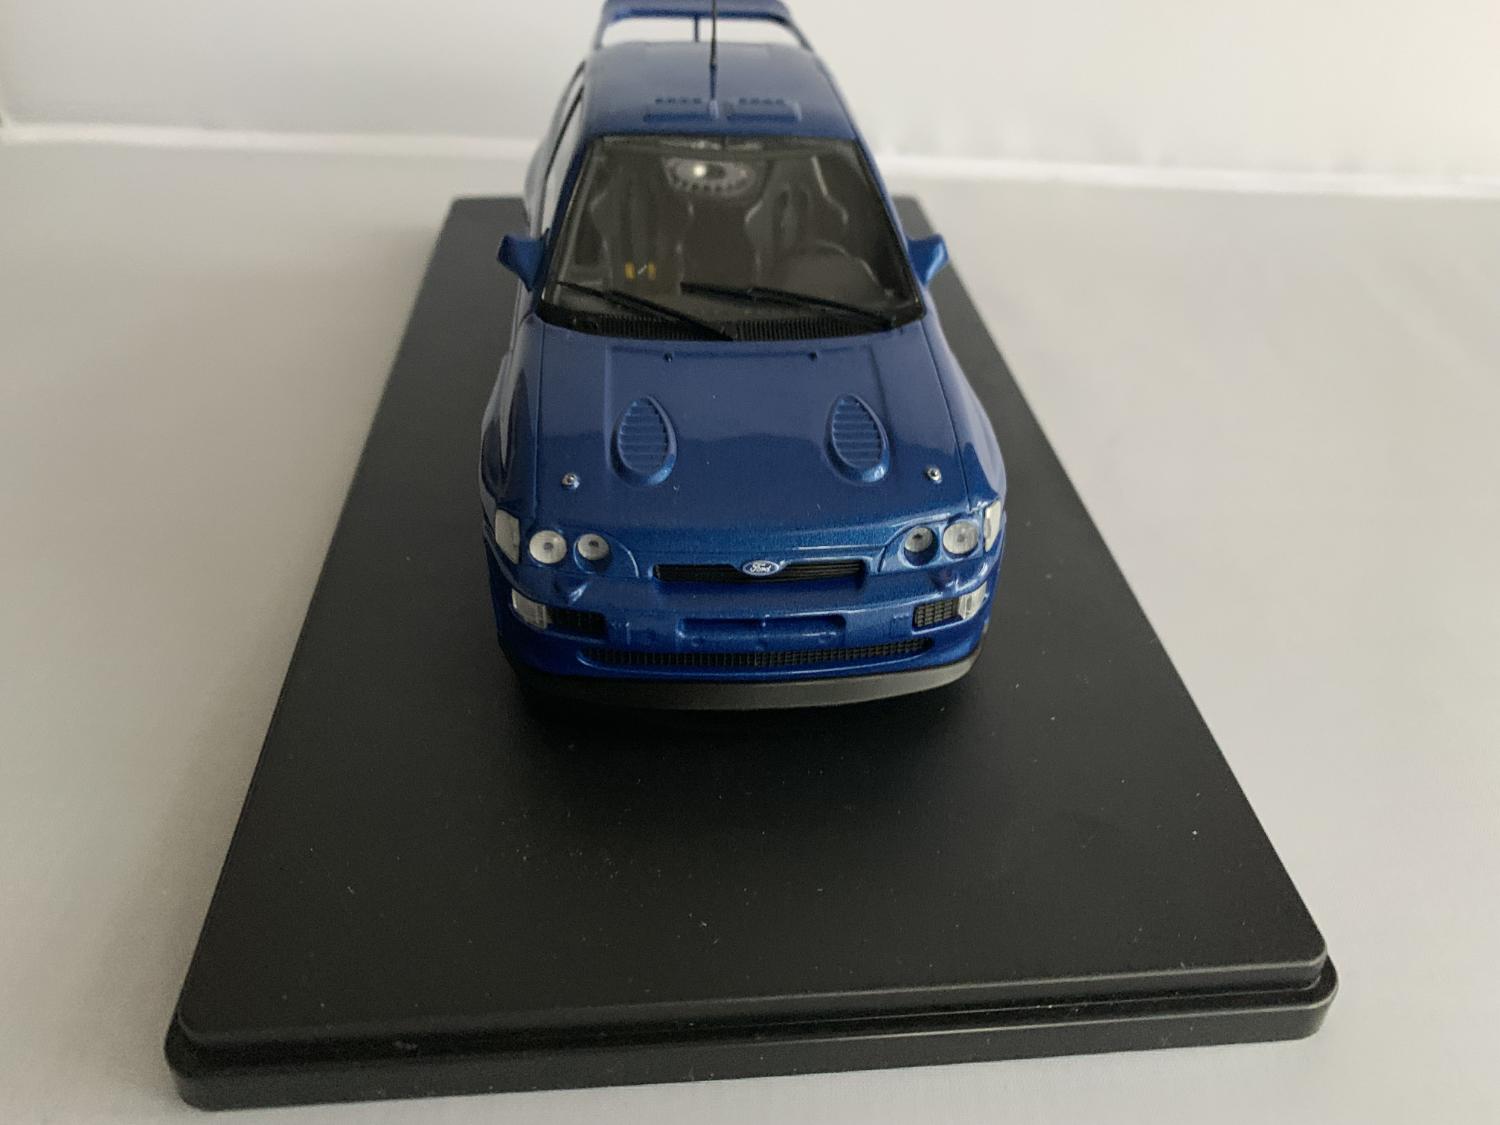 Ford Escort RS Cosworth 1993 in metallic blue 1:24 scale model from Whitebox